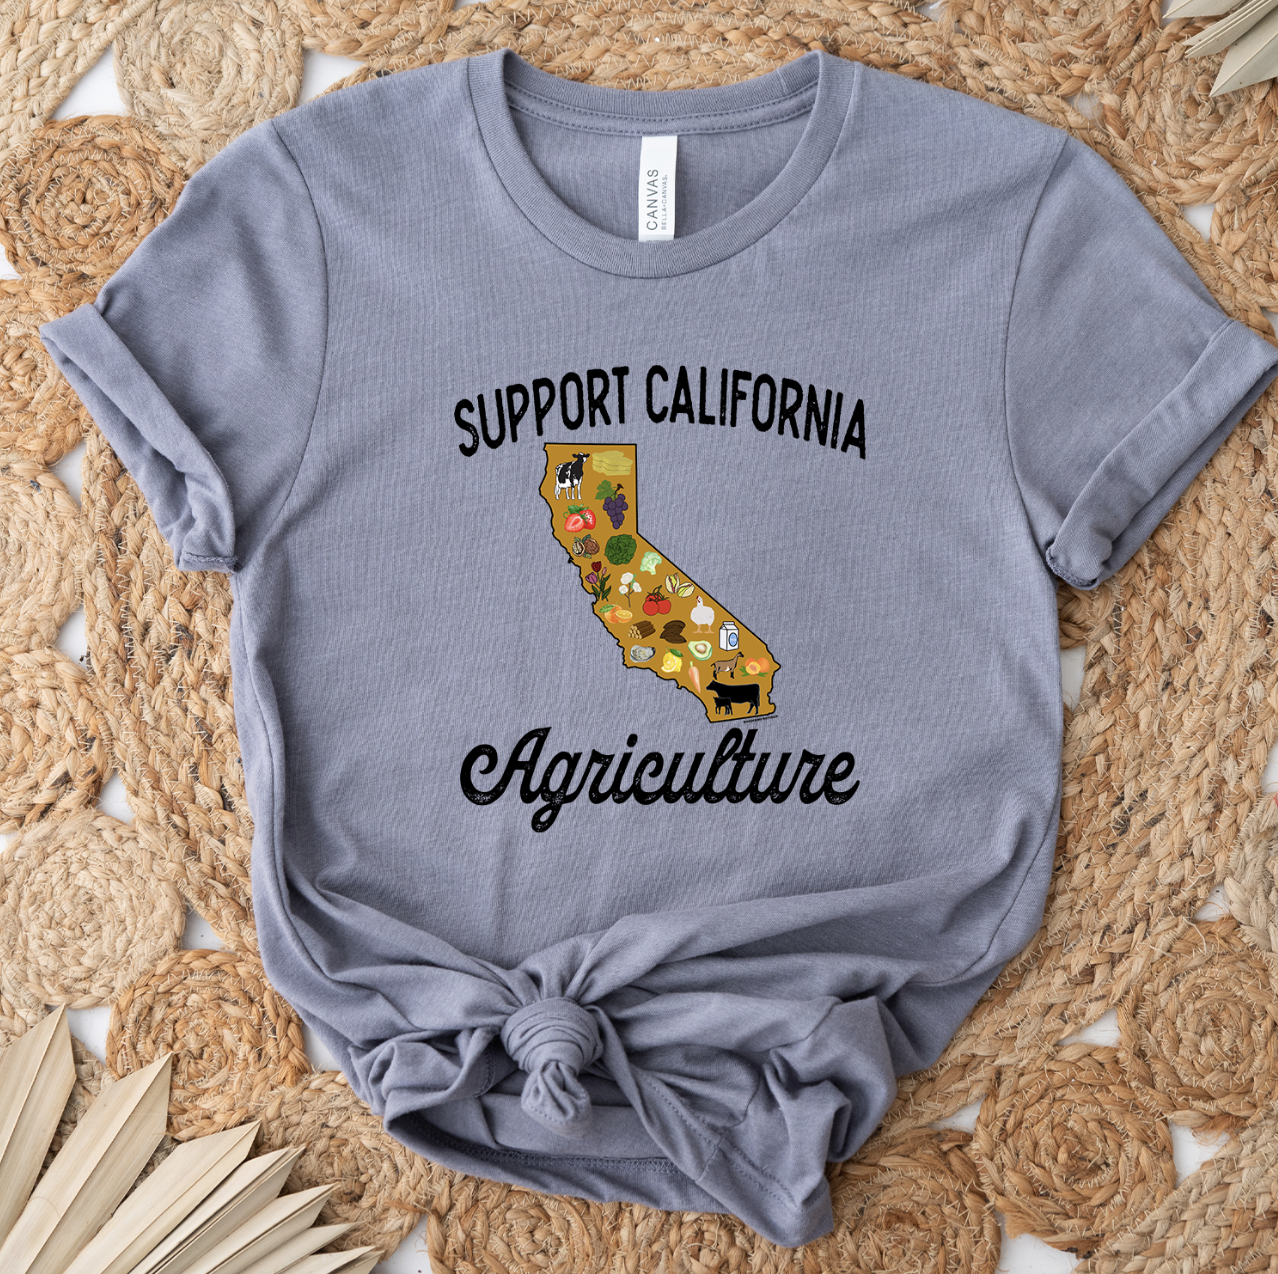 Support California Agriculture T-Shirt (XS-4XL) - Multiple Colors!